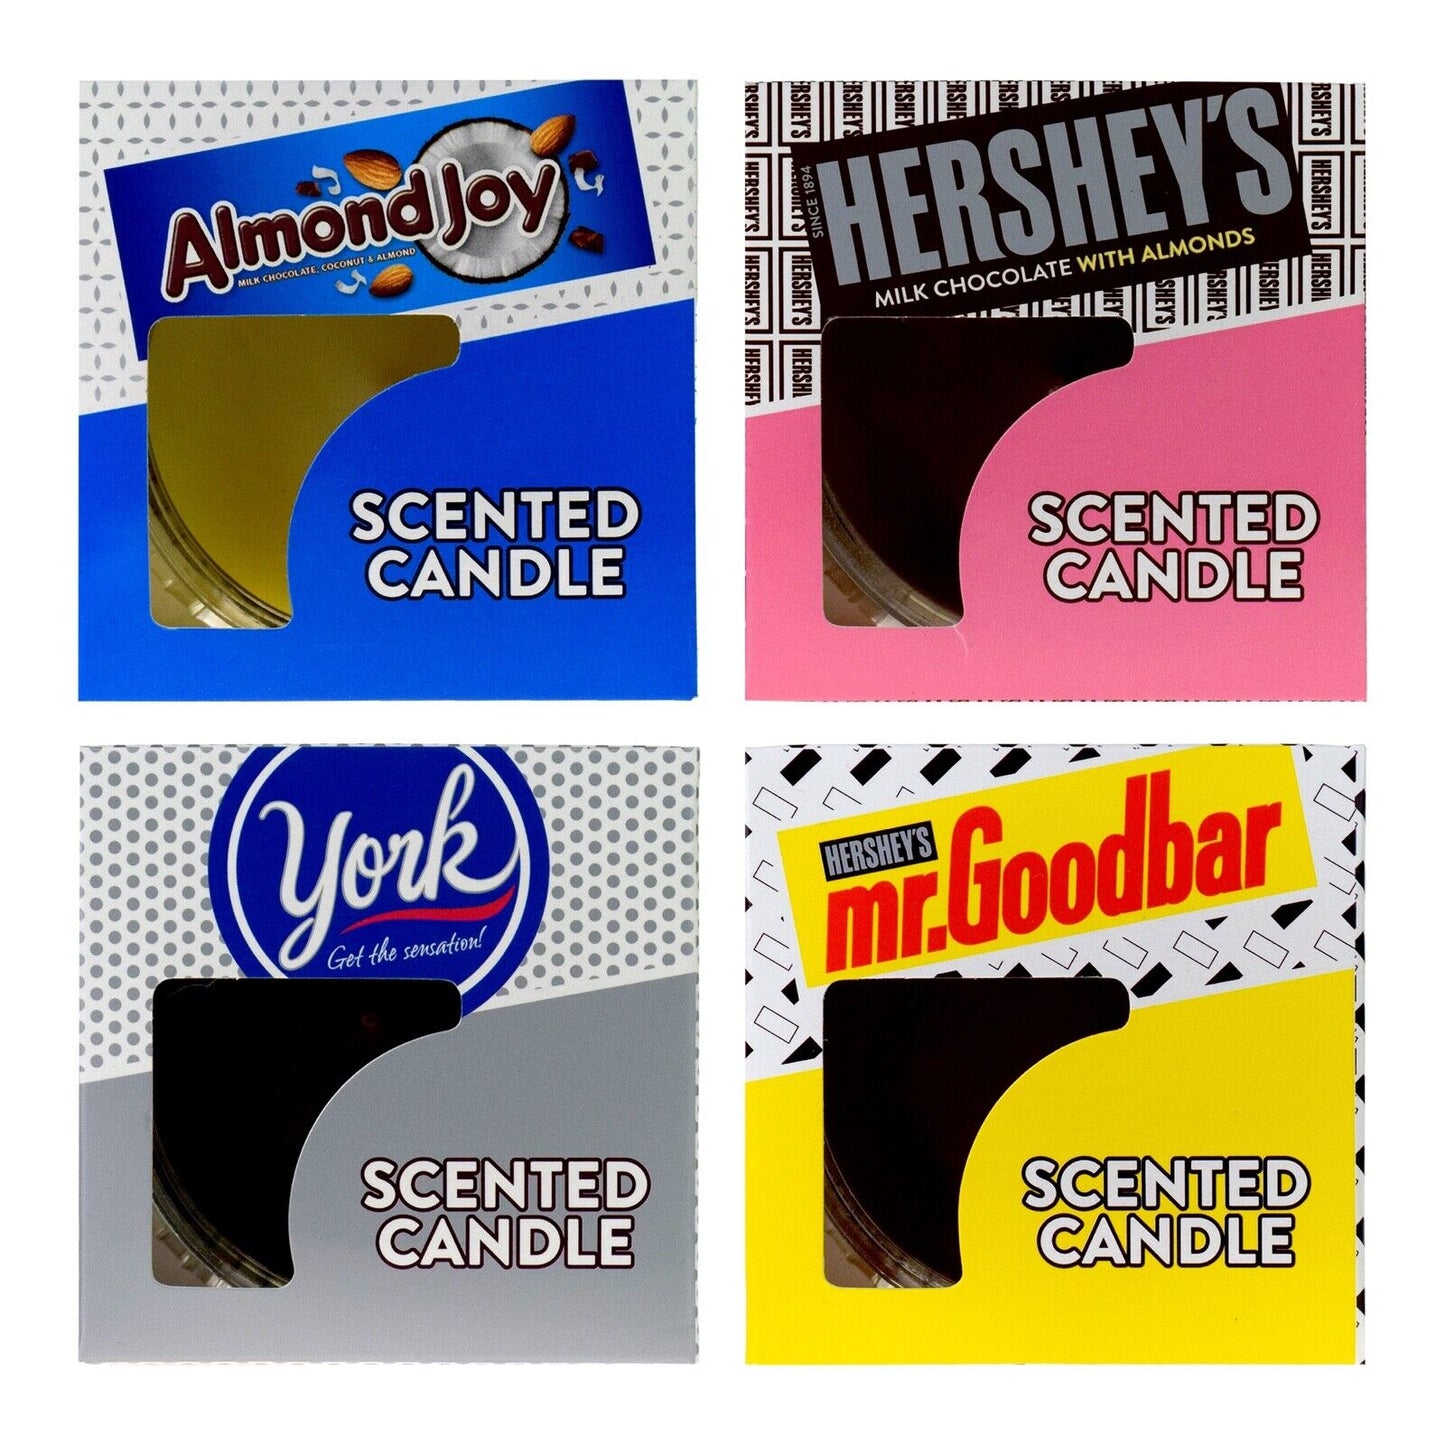 4 CANDY SCENTED 85g Scented Candles